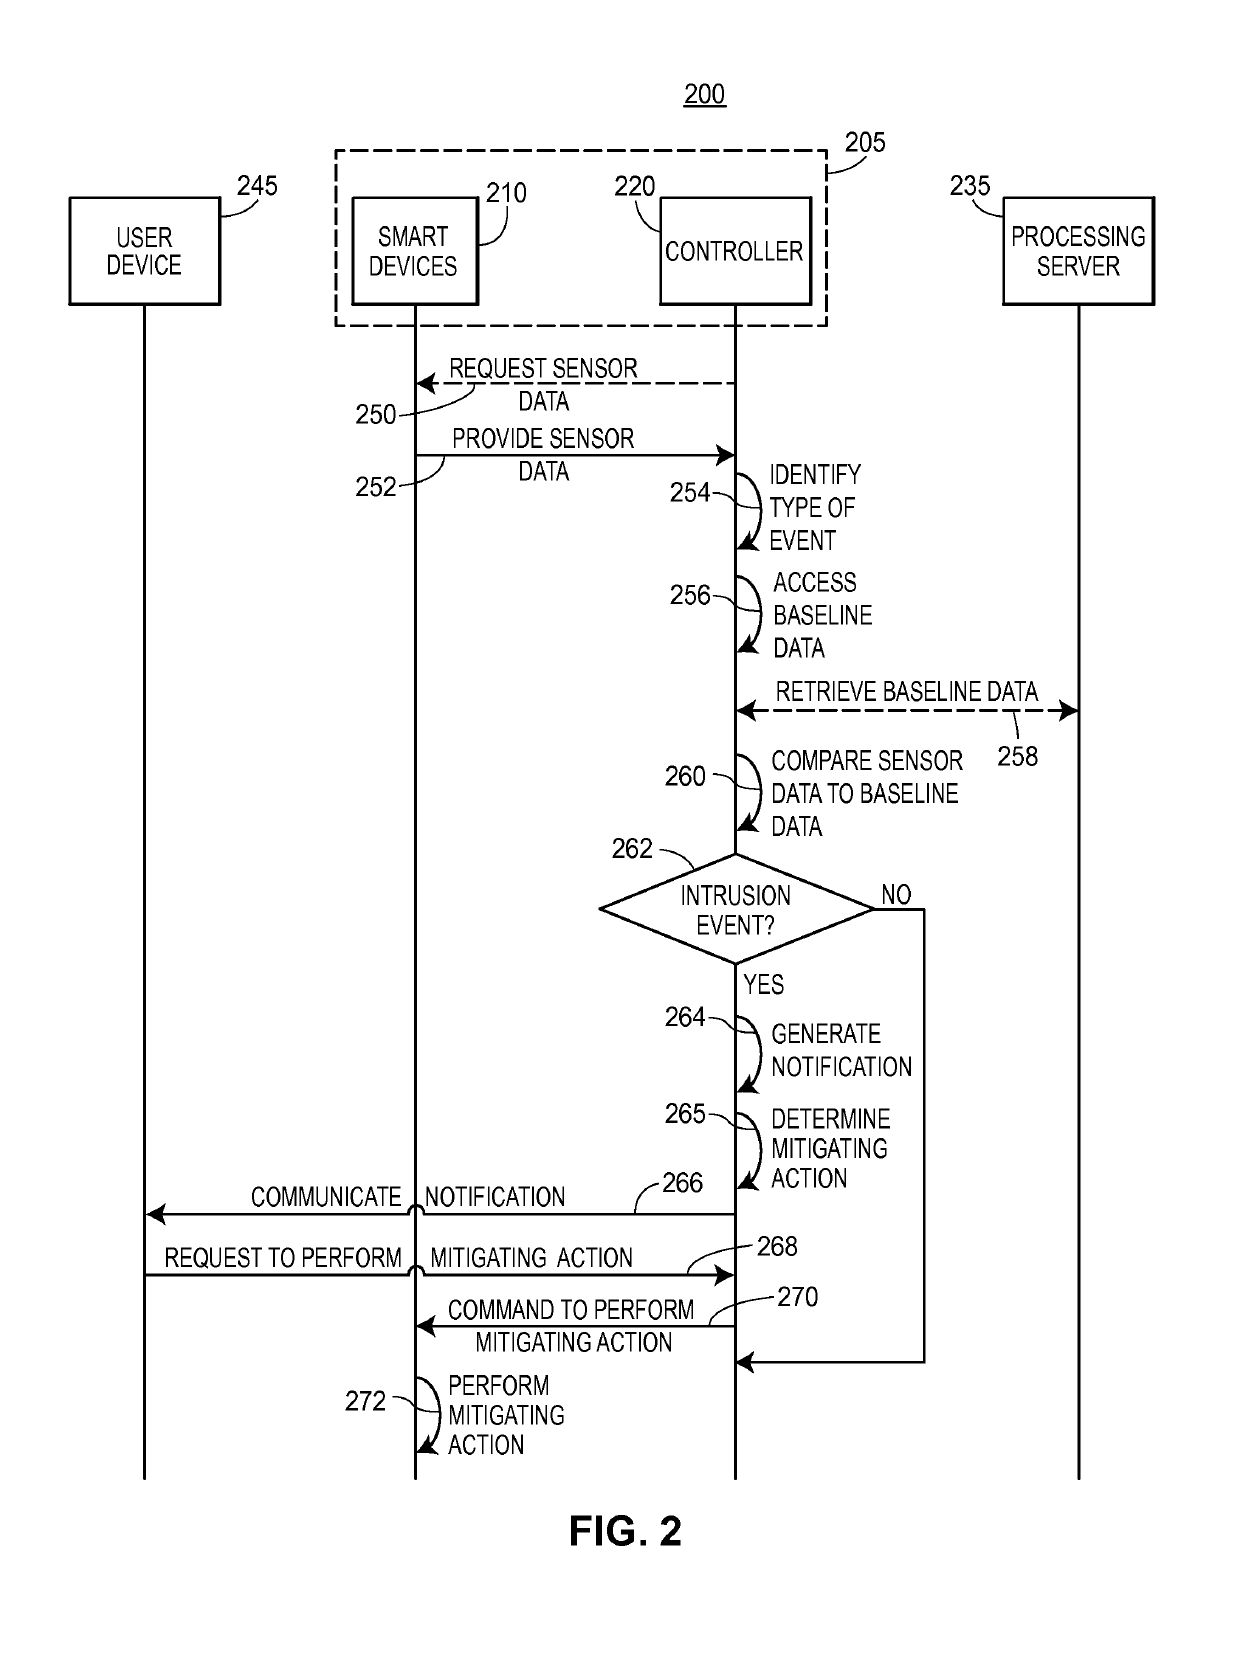 Systems and methods for analyzing sensor data to detect property intrusion events